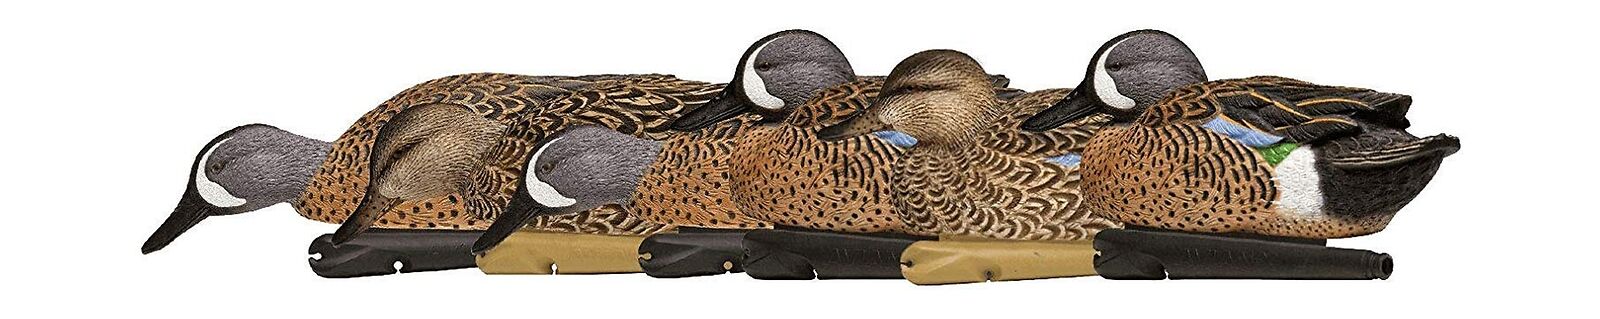 Avian-X Topflight Blue-Winged Teal Durable Ultra Realistic Floating Hunting Duck Decoys, Pack of 6, AVX8080